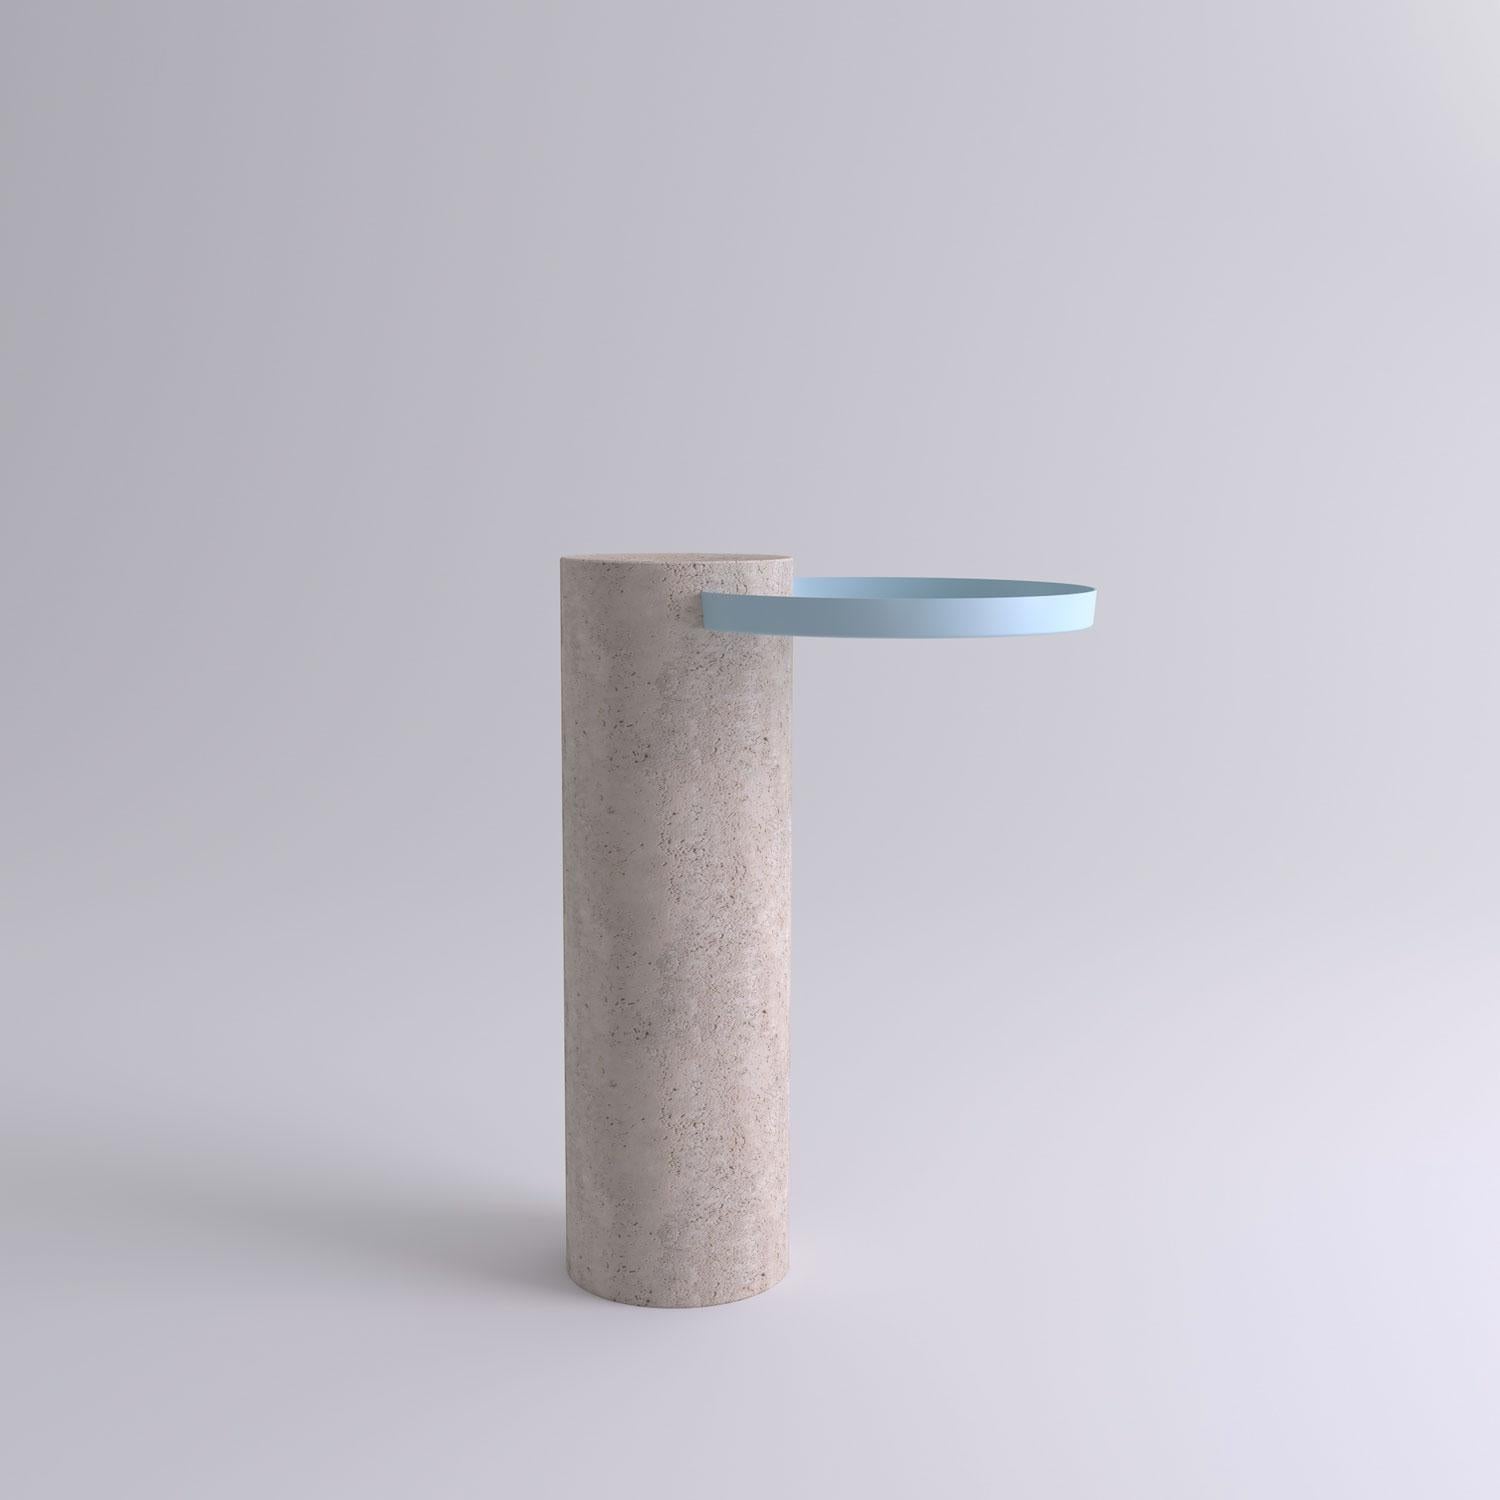 High travertine contemporary guéridon, Sebastian Herkner
Dimensions: D 42 x H 57 cm
Materials: Travertine marble, light blue metal tray

The salute table exists in 3 sizes, 4 different marble stones for the column and 5 different finishes for